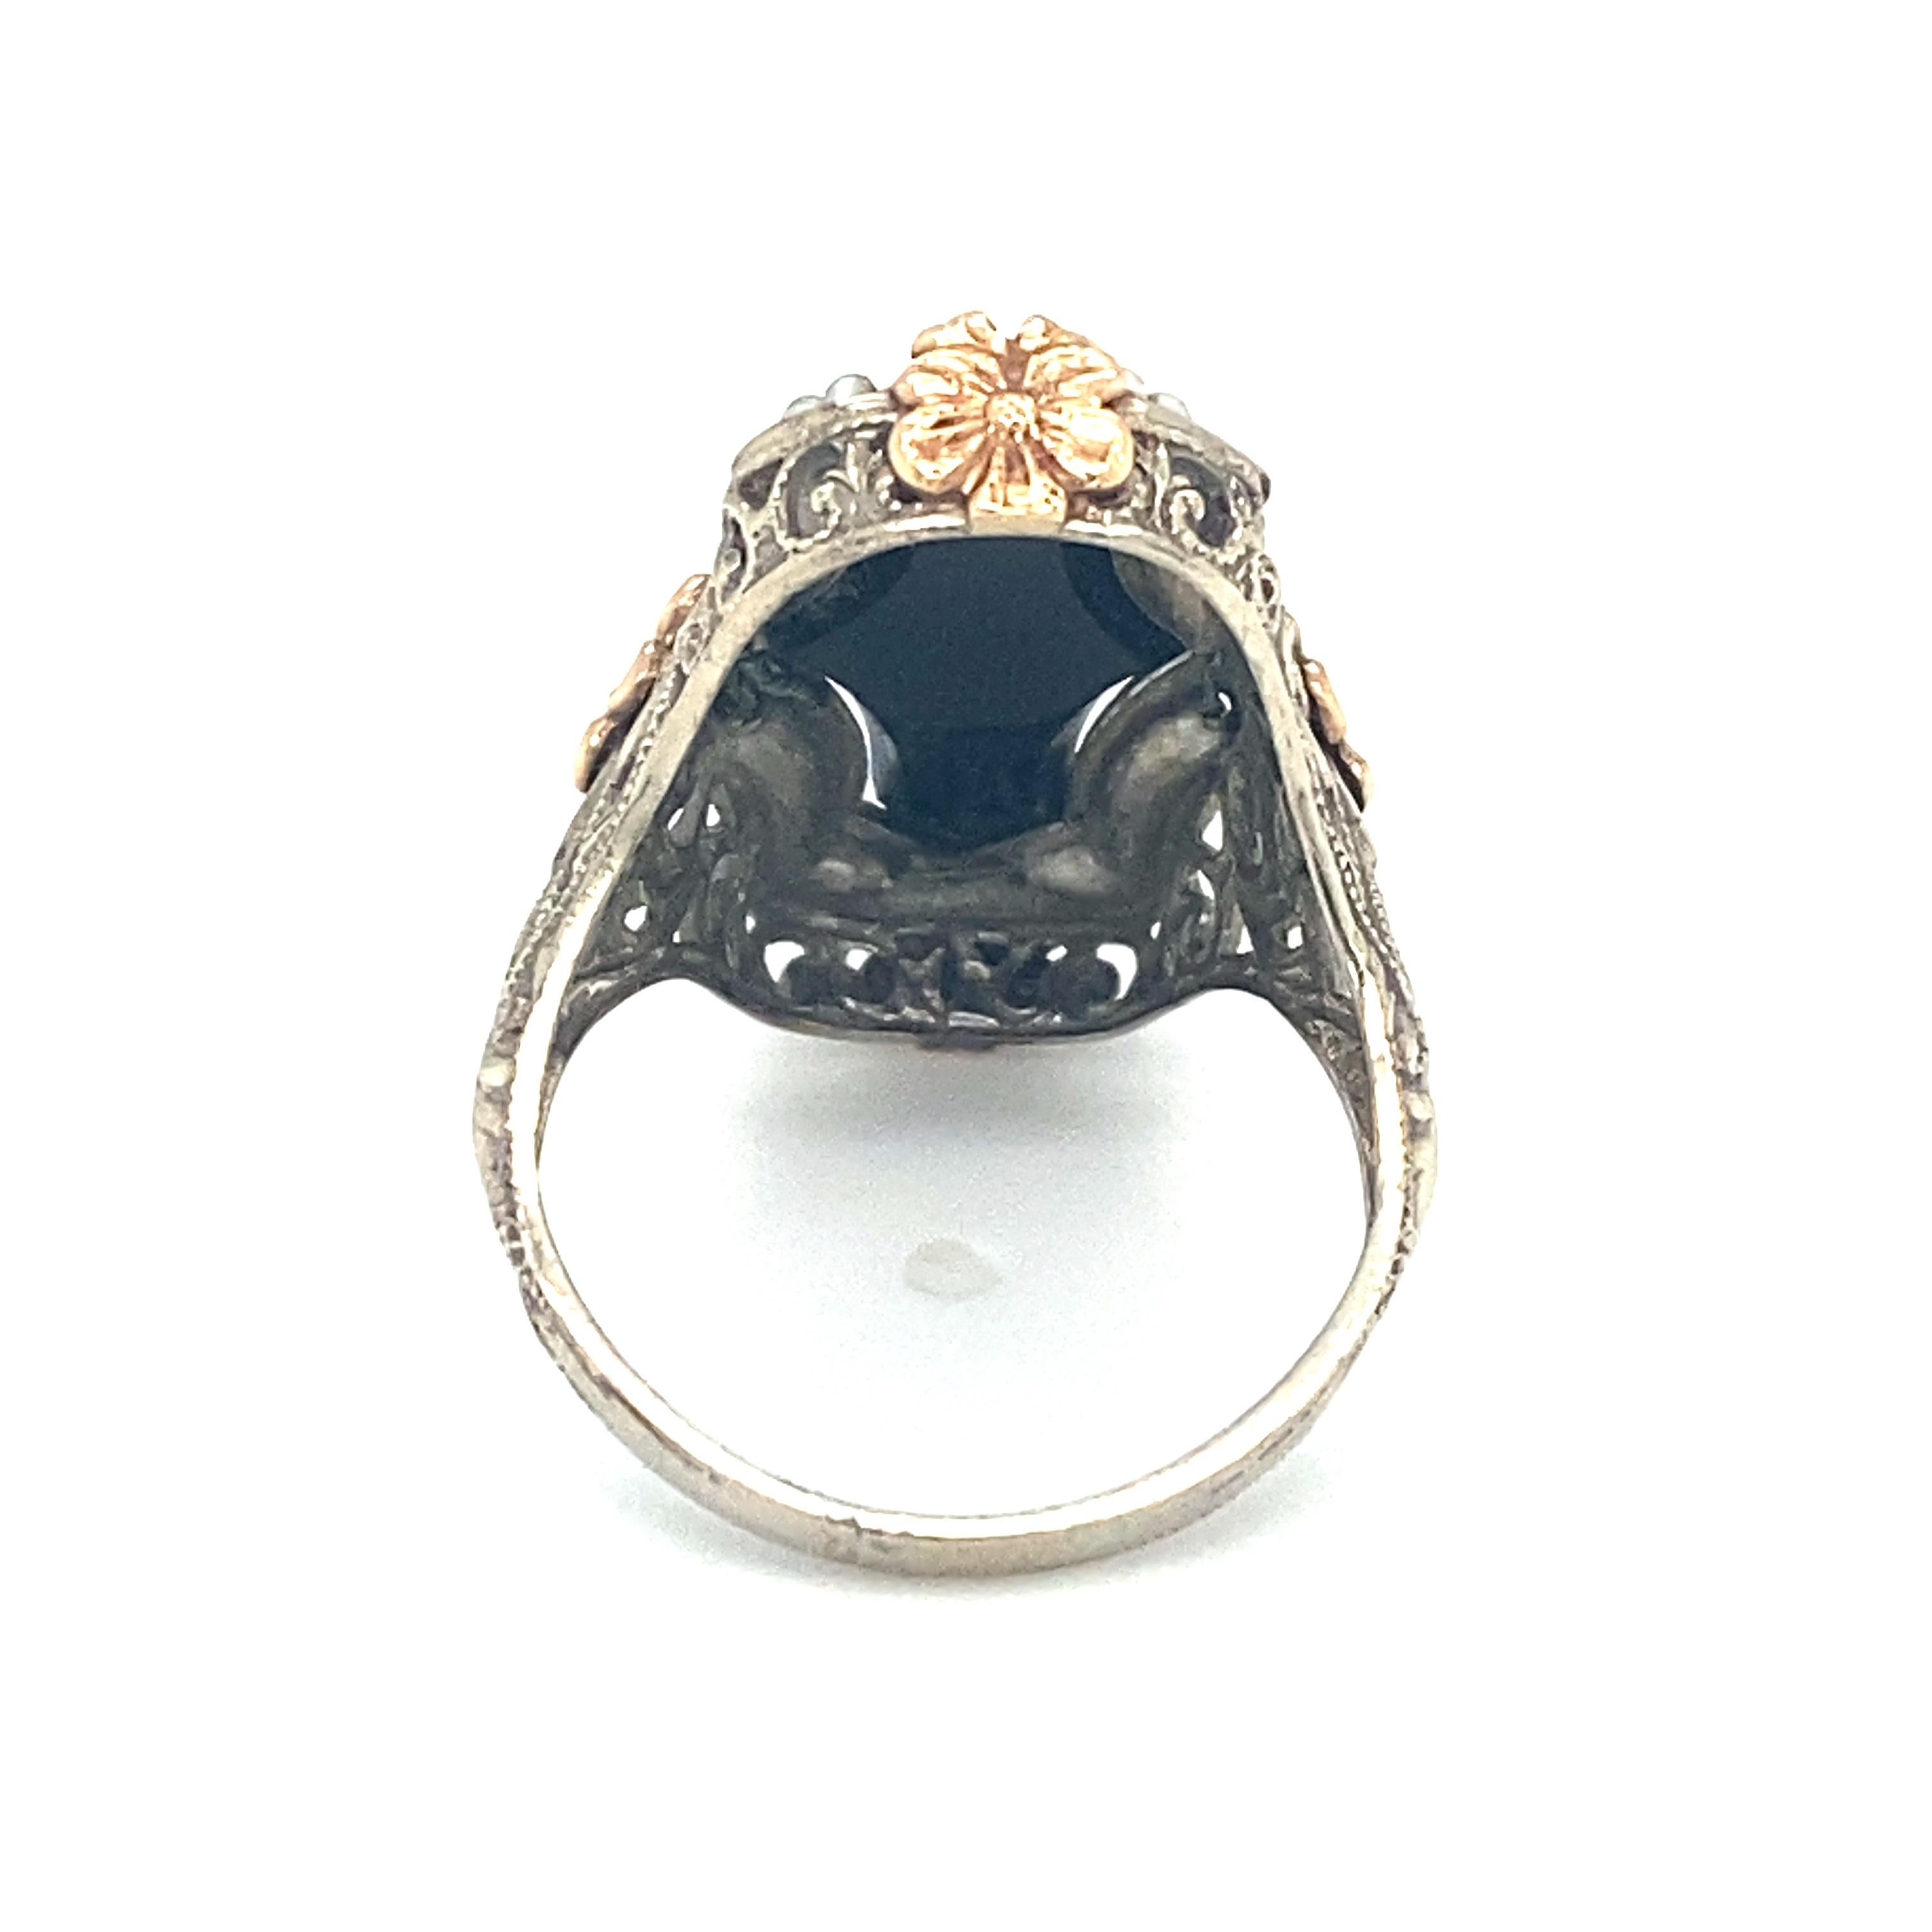 Women's or Men's Circa 1920s Art Deco Onyx and Pearl Ring in Two Tone 14K Gold For Sale